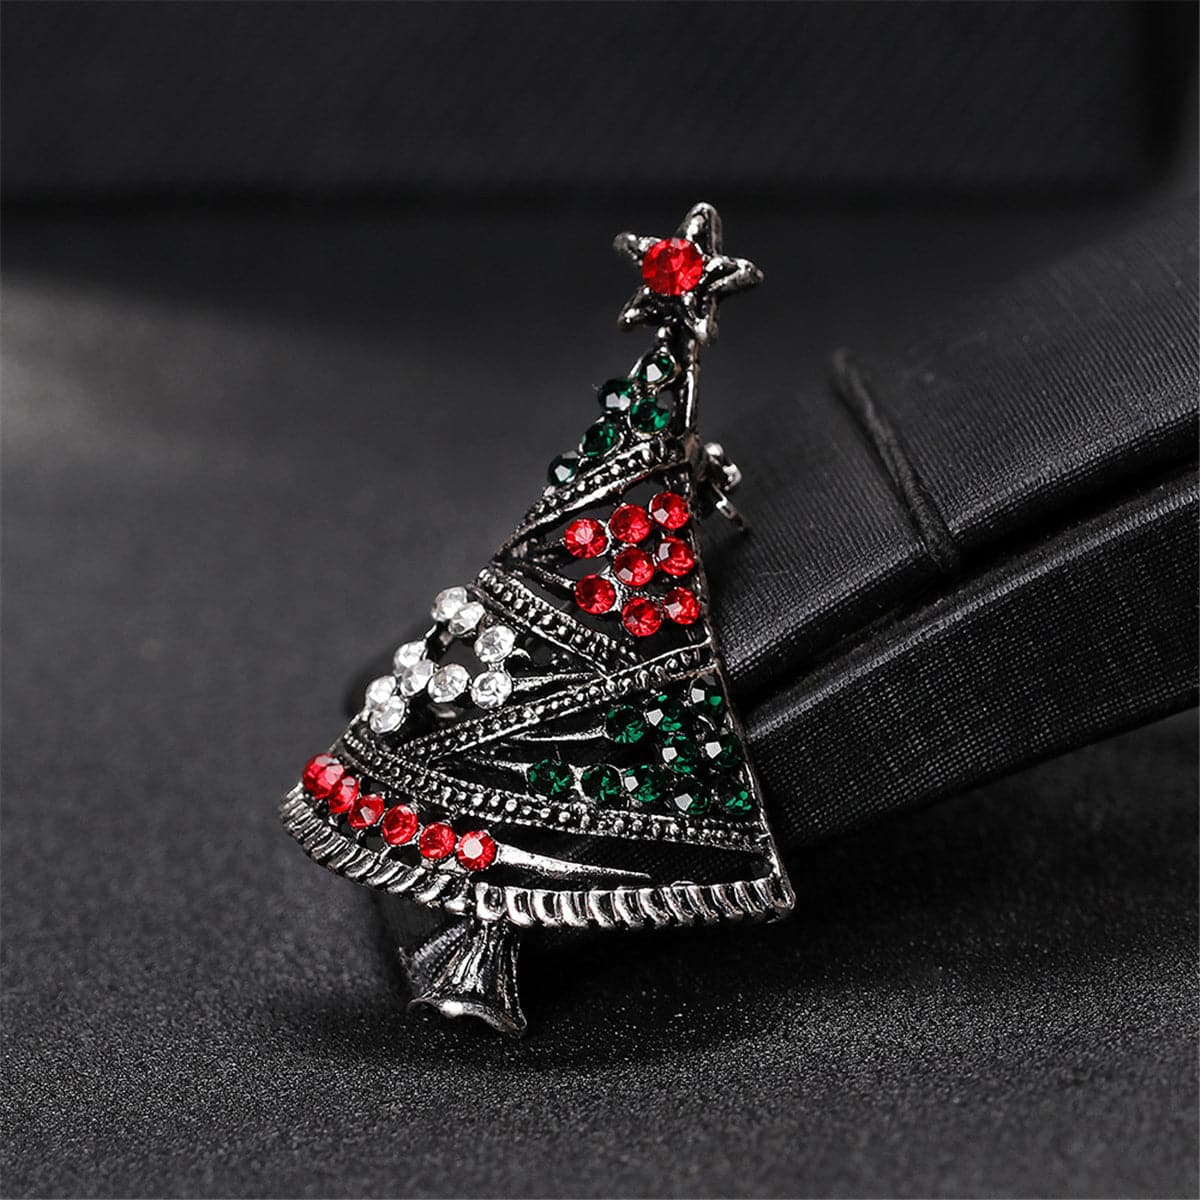 Cubic Zirconia & Silver-Plated Openwork Christmas Tree Brooch